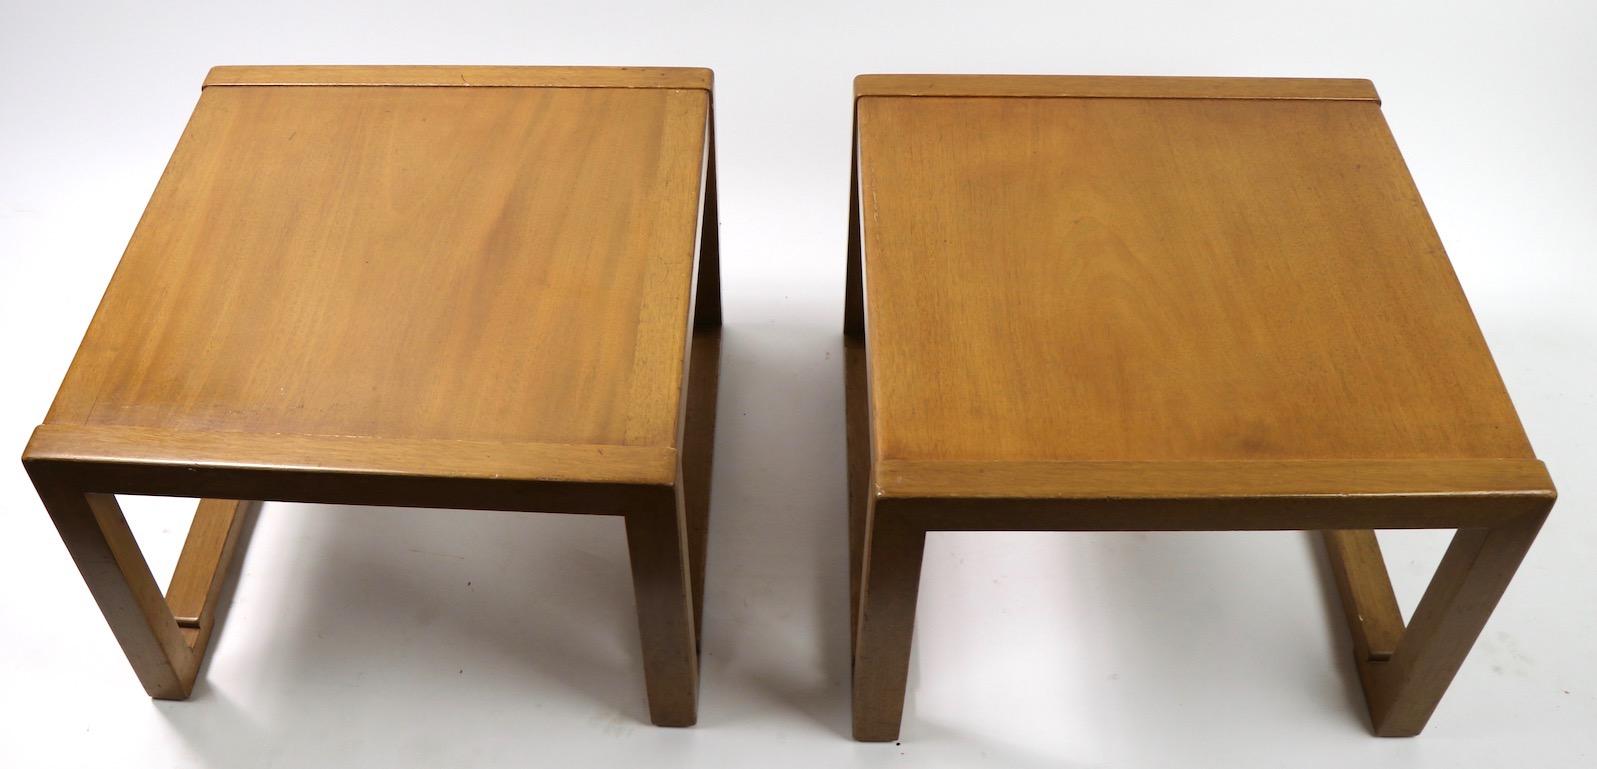 20th Century Pair of Tables designed by Wormley for Dunbar